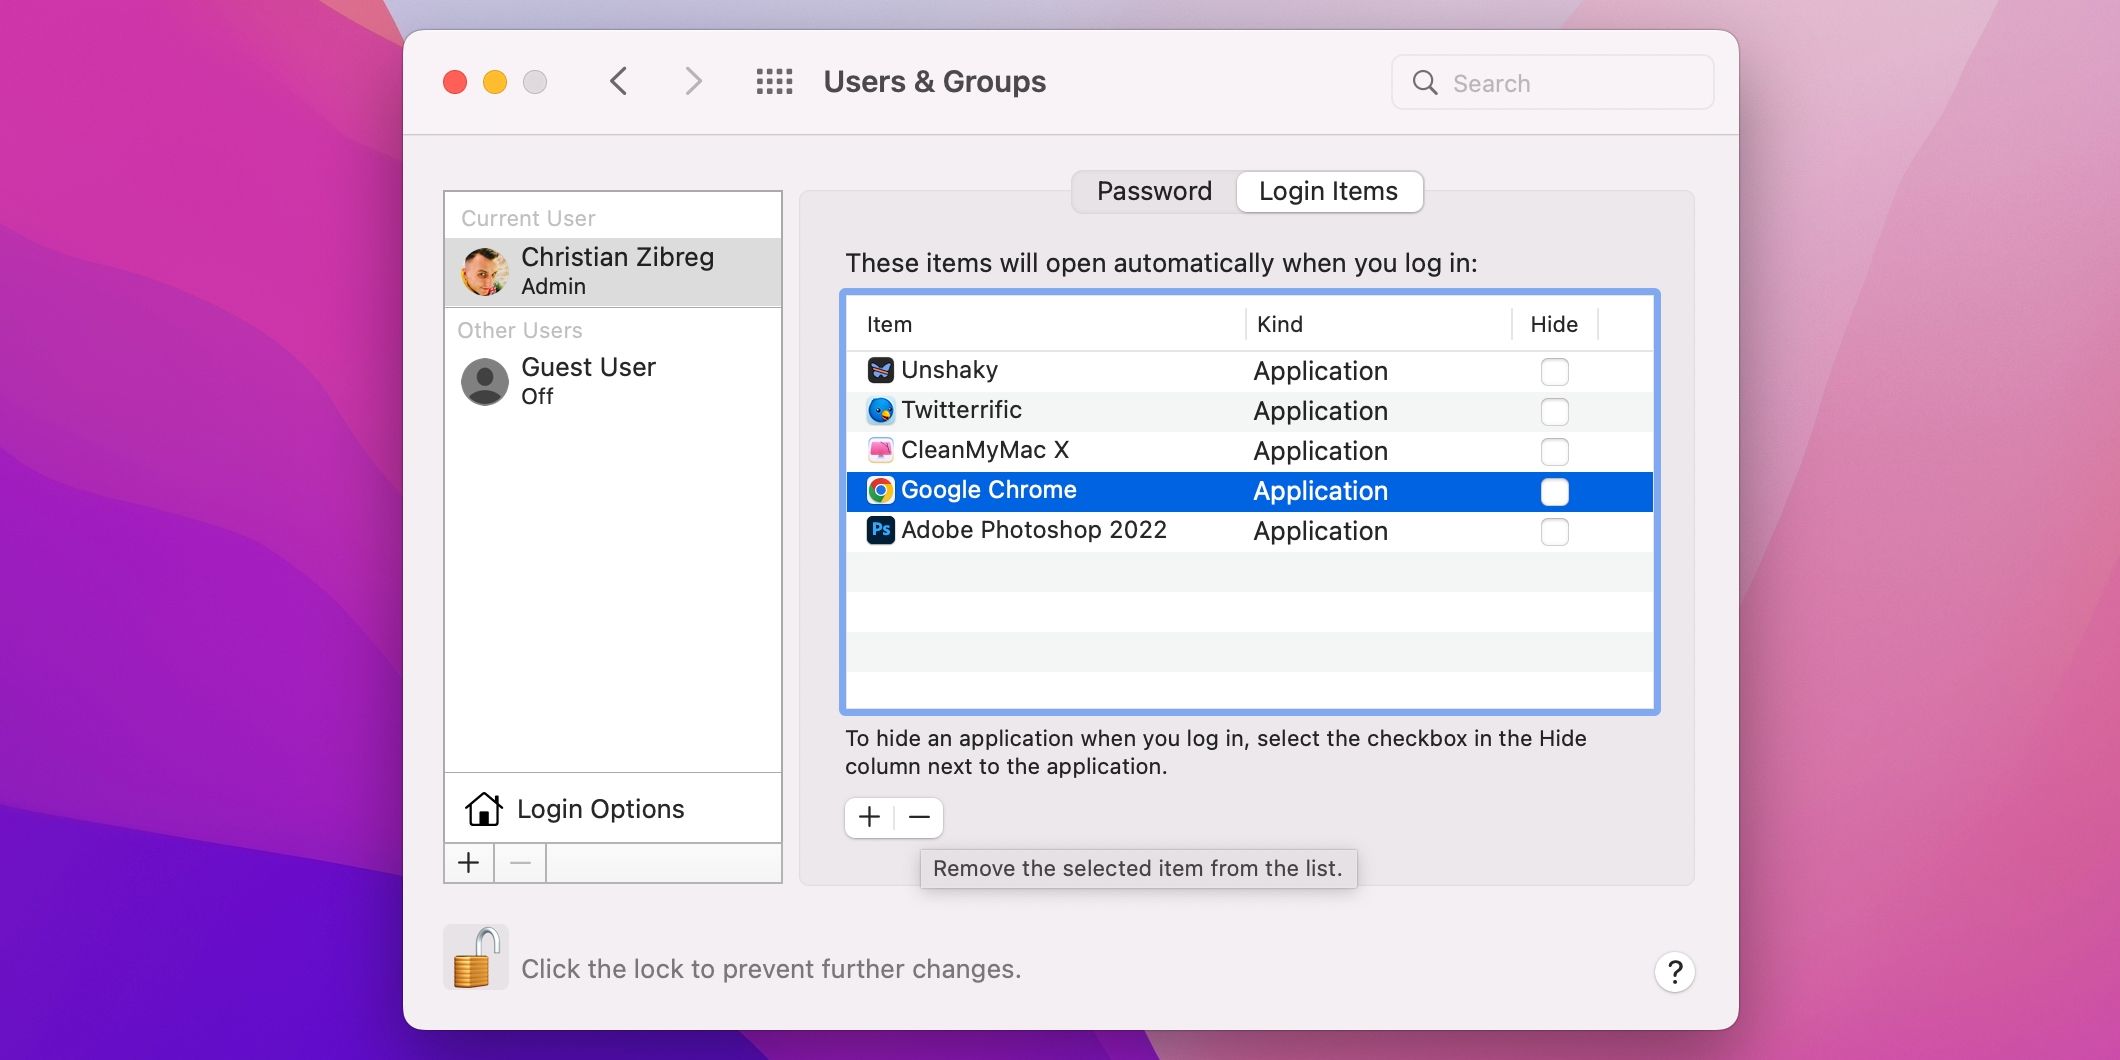 macOS Monterey with the Users and Groups section in System Preferences showing the Google Chrome app selected under Login Items